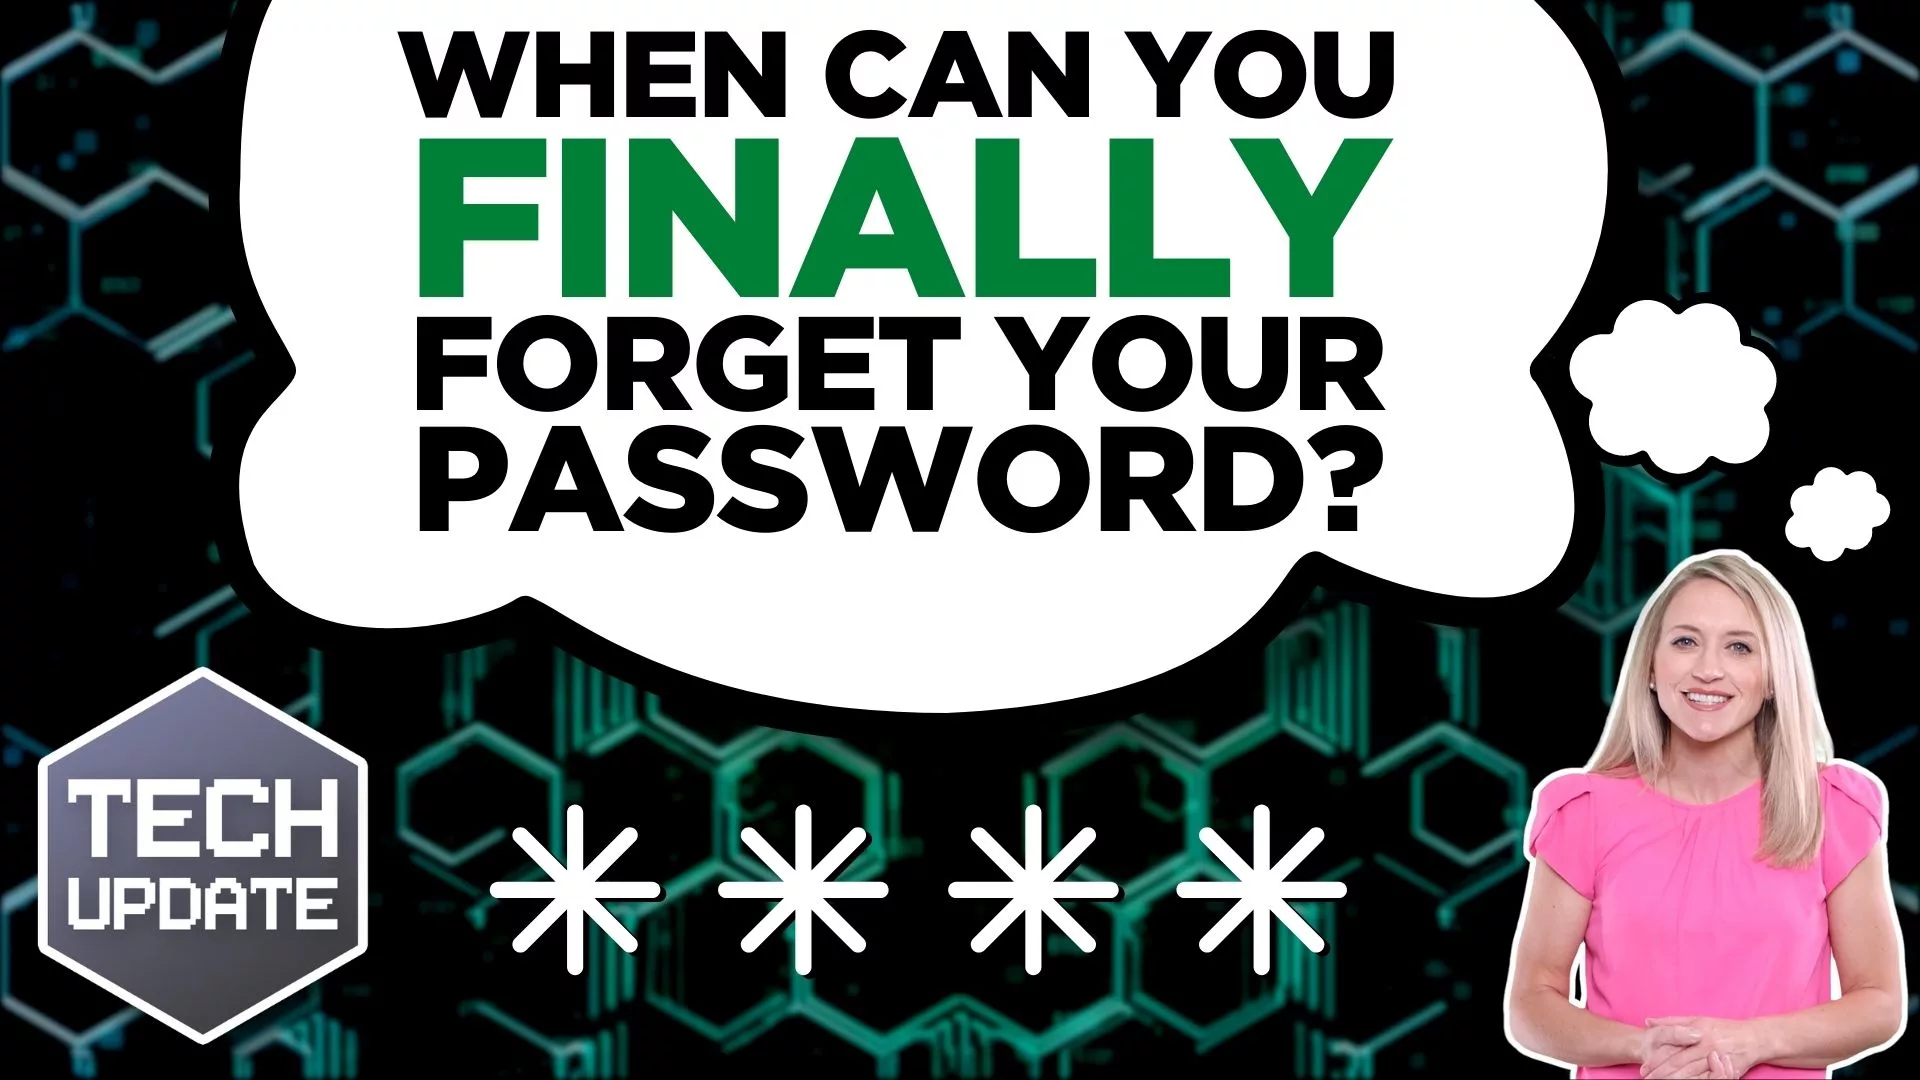 When can you finally forget your password? tech update.